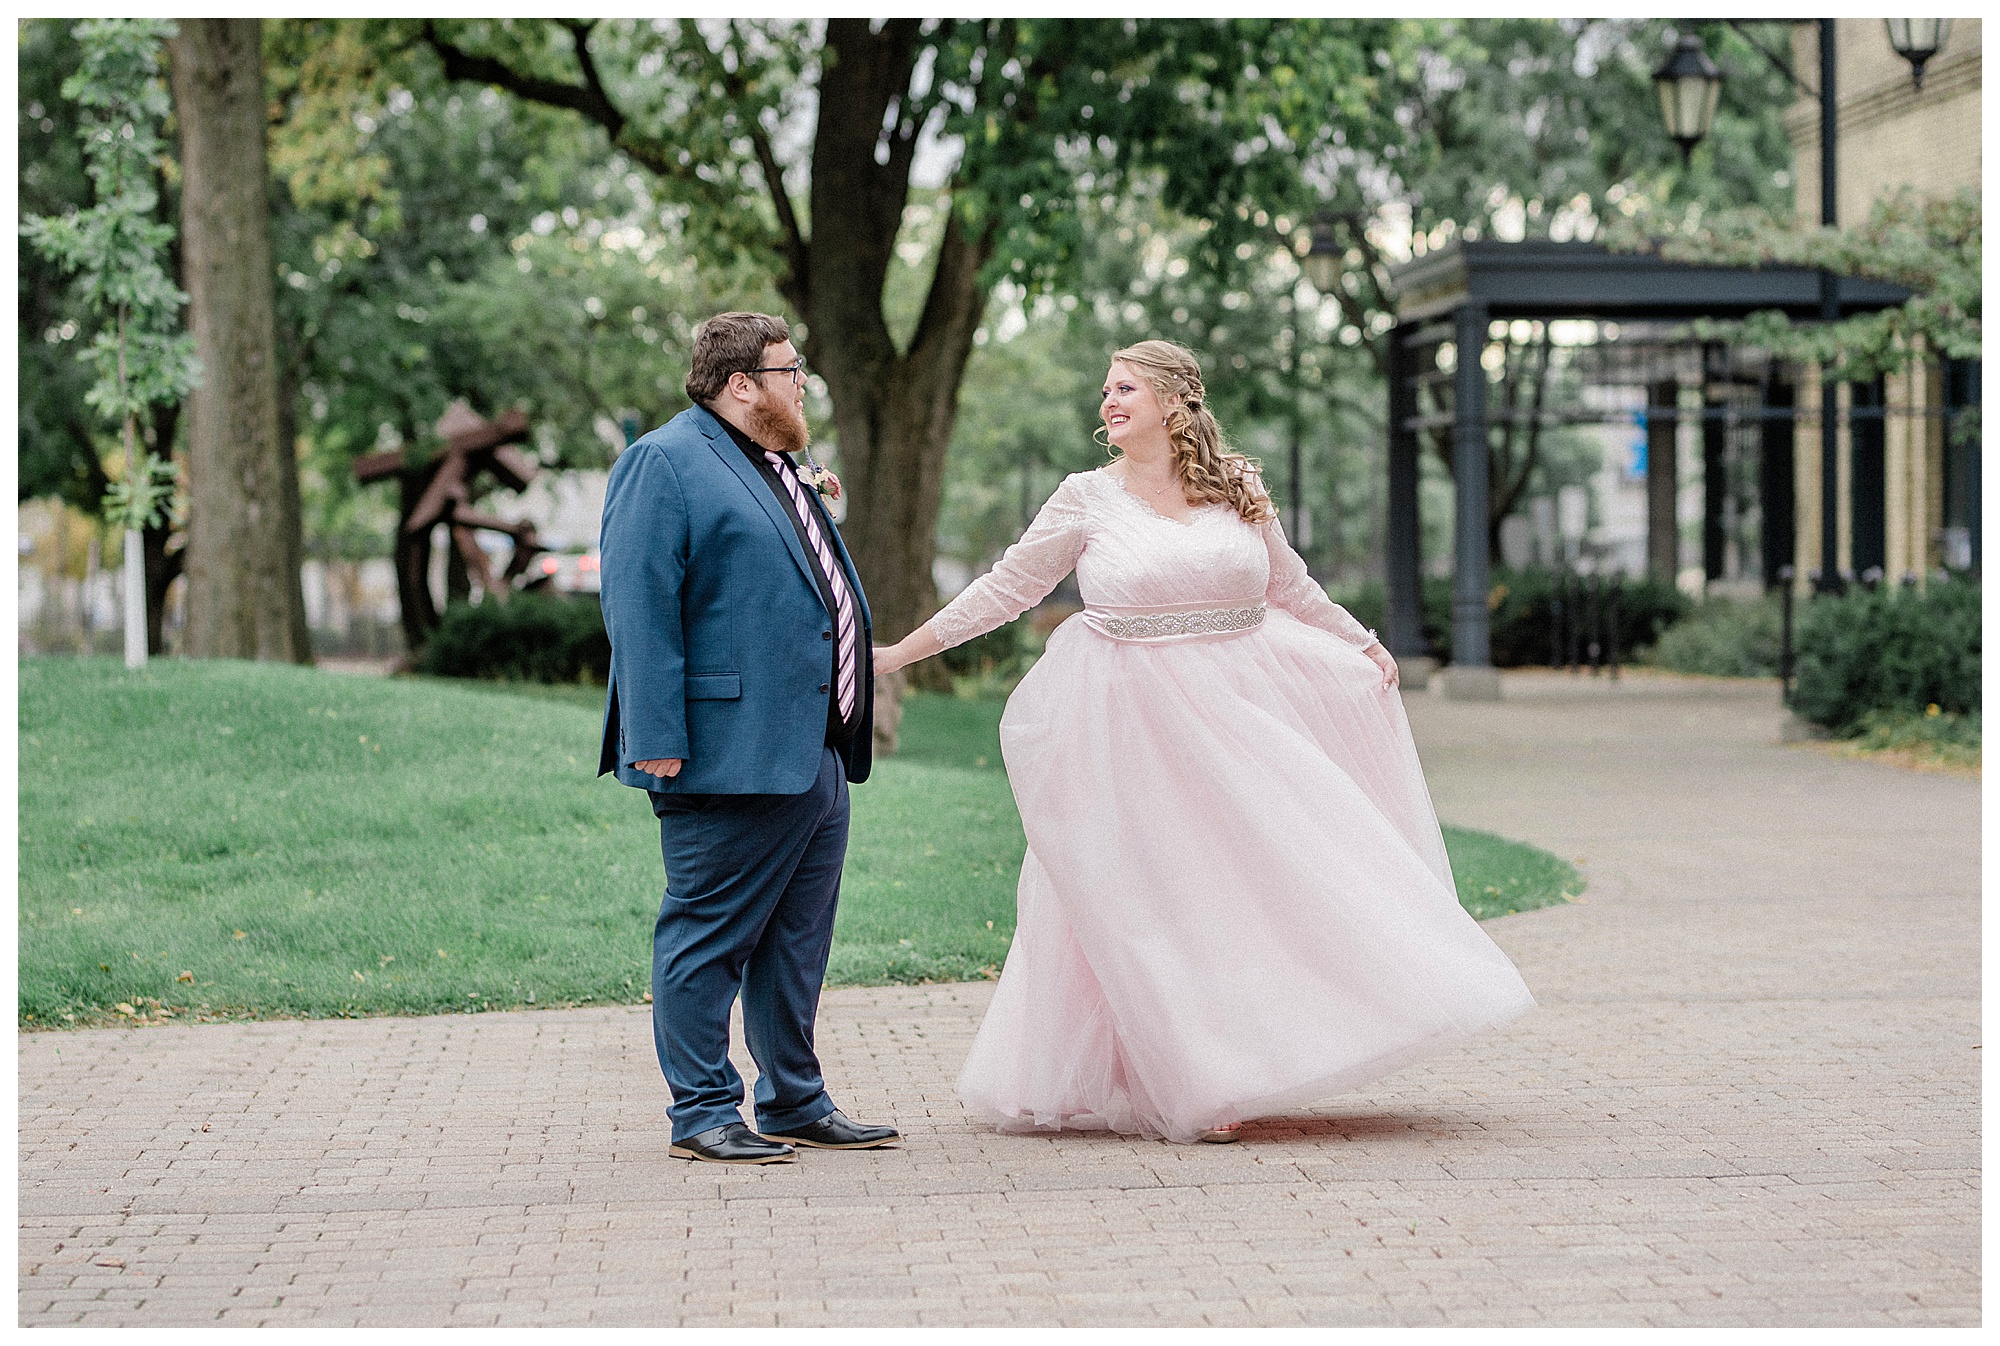 Bride and groom portraits for a Minneapolis wedding